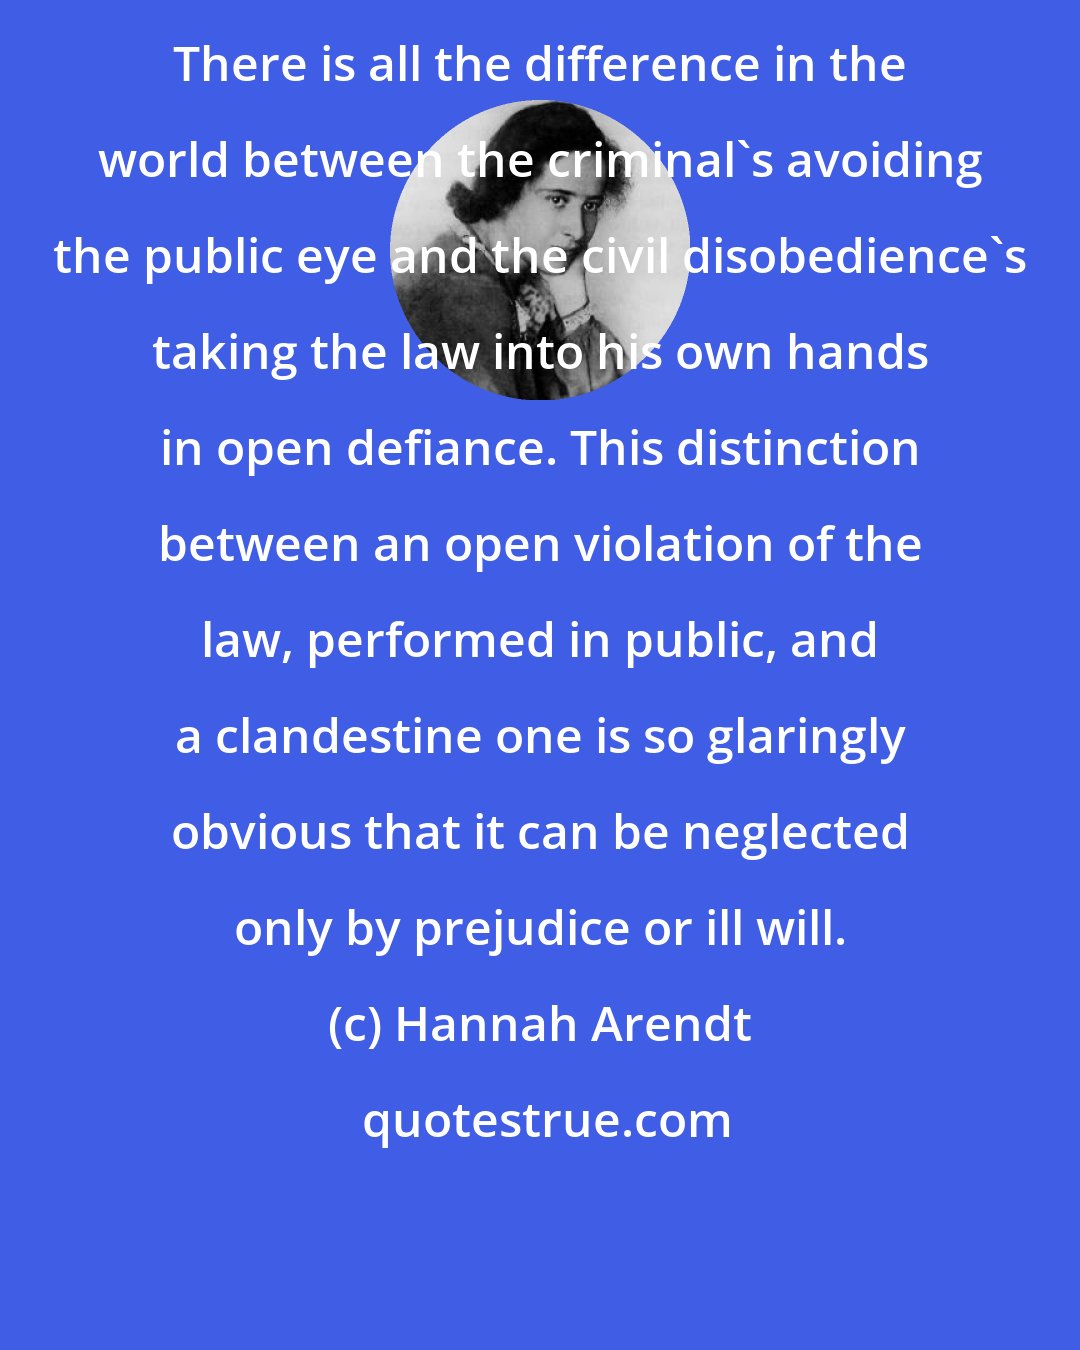 Hannah Arendt: There is all the difference in the world between the criminal's avoiding the public eye and the civil disobedience's taking the law into his own hands in open defiance. This distinction between an open violation of the law, performed in public, and a clandestine one is so glaringly obvious that it can be neglected only by prejudice or ill will.